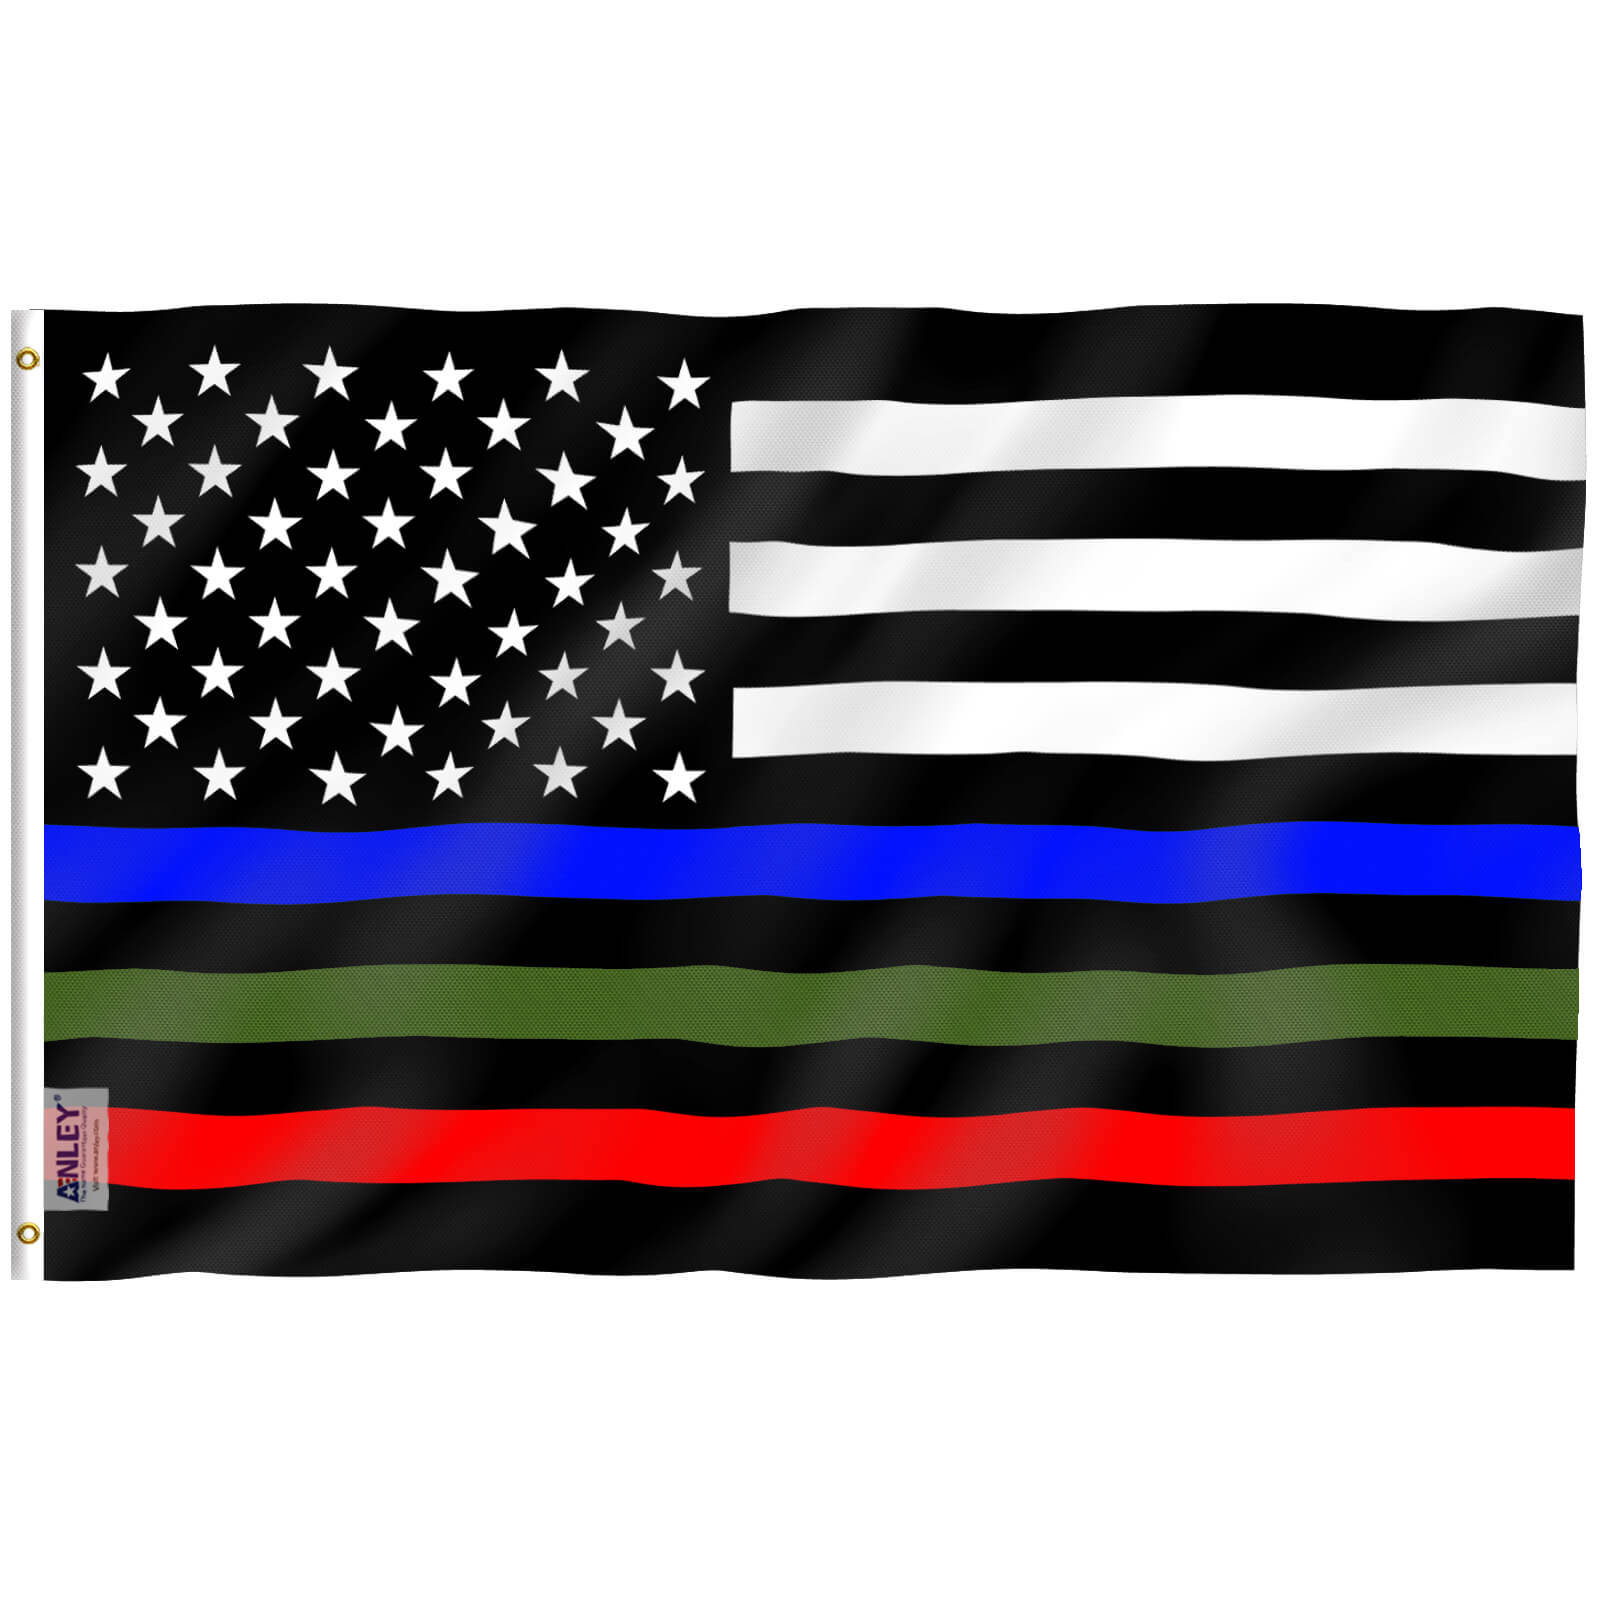 laver mad Ufrugtbar Penelope Fly Breeze 3x5 Foot Thin Blue Red and Green Line USA Flag - Anley Flags